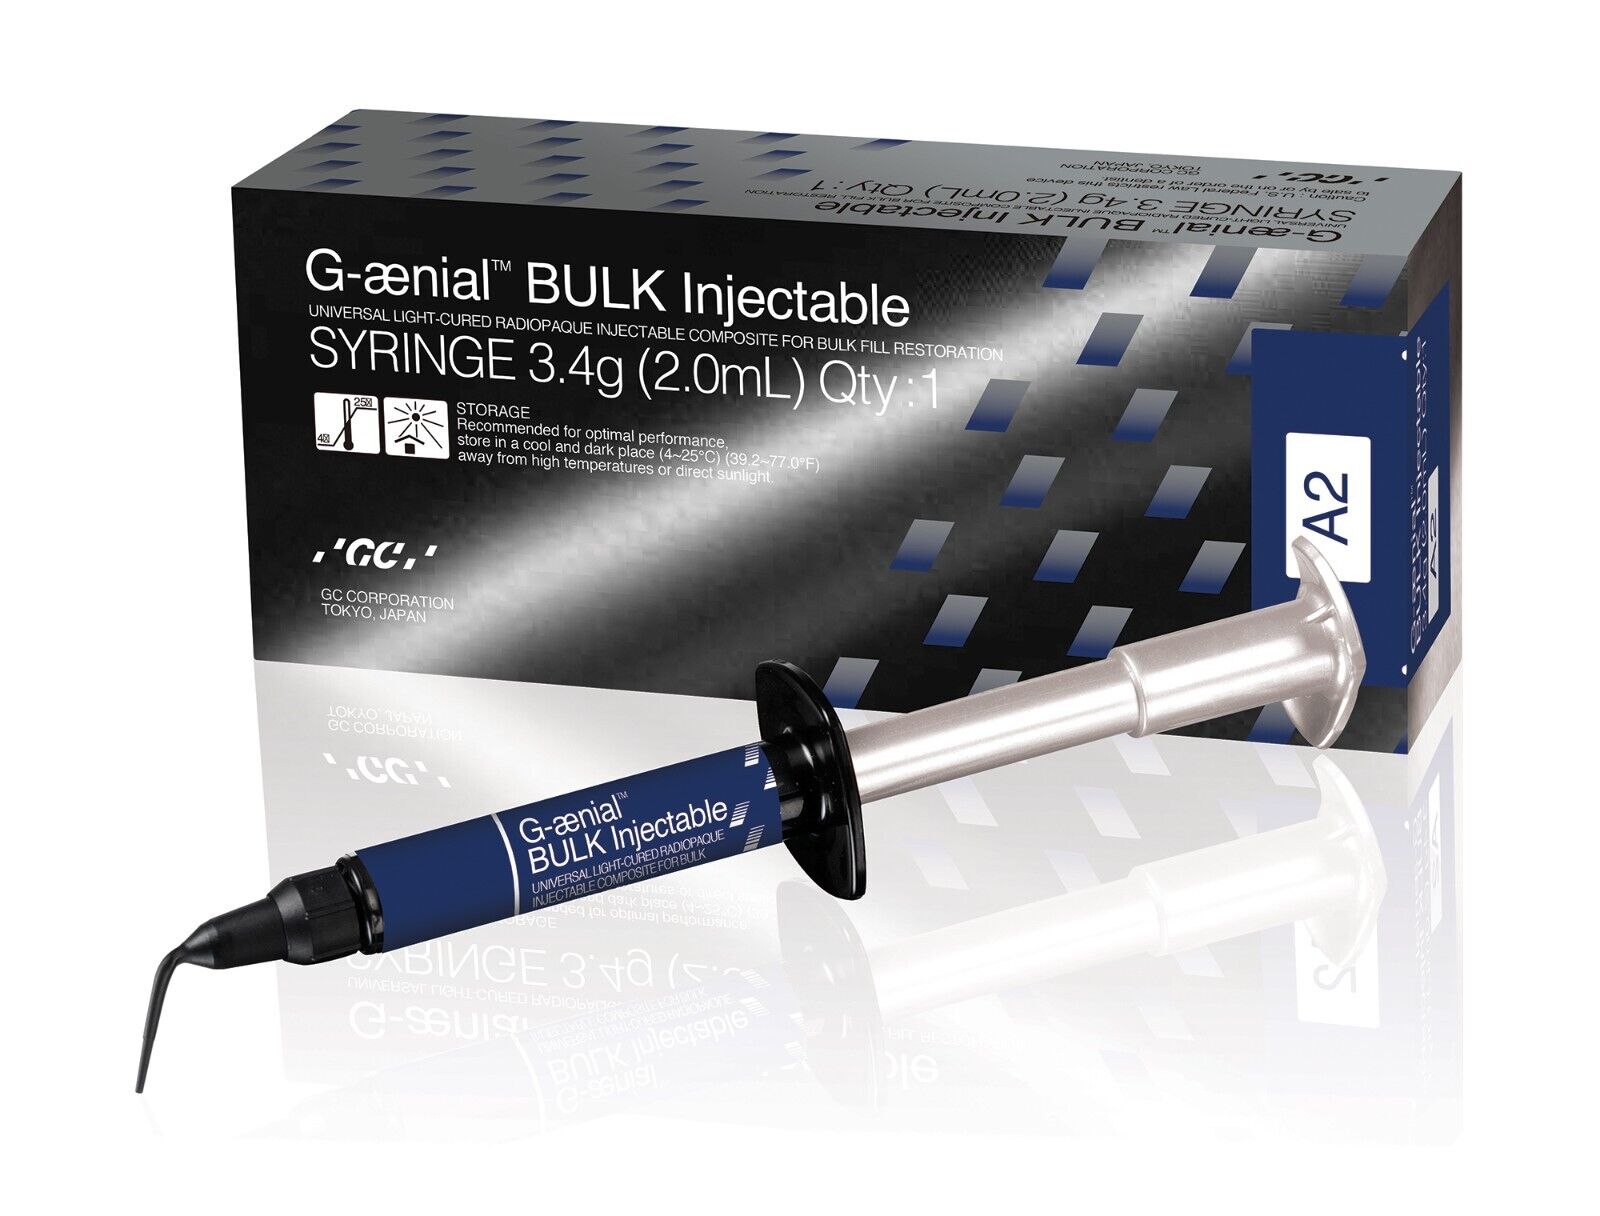 G-aenial Bulk Injectable Composite Syringe, 1x 3.4g All Shades by GC America